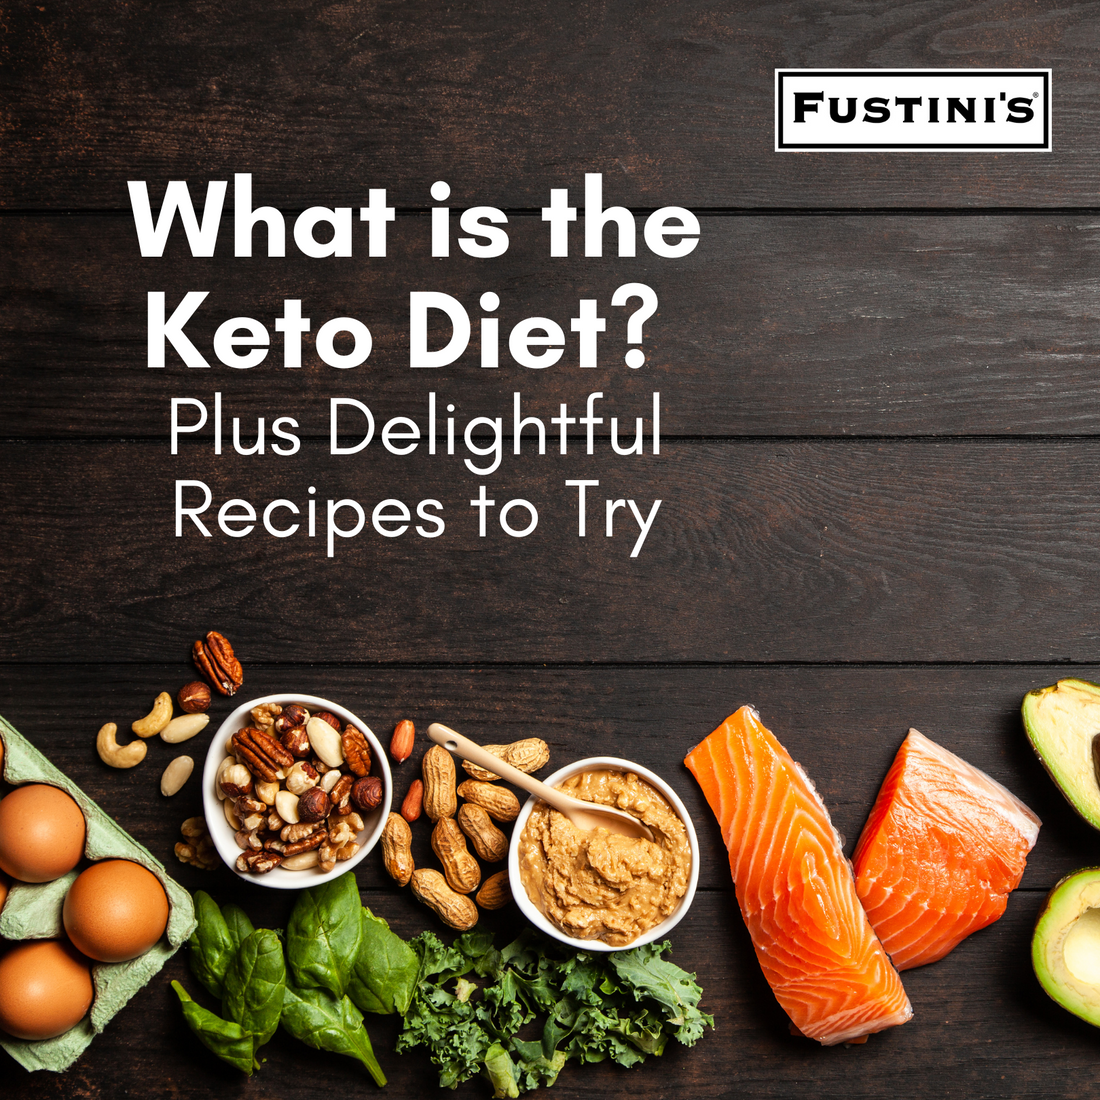 What is the Keto Diet? And Delightful Recipes You Should Try